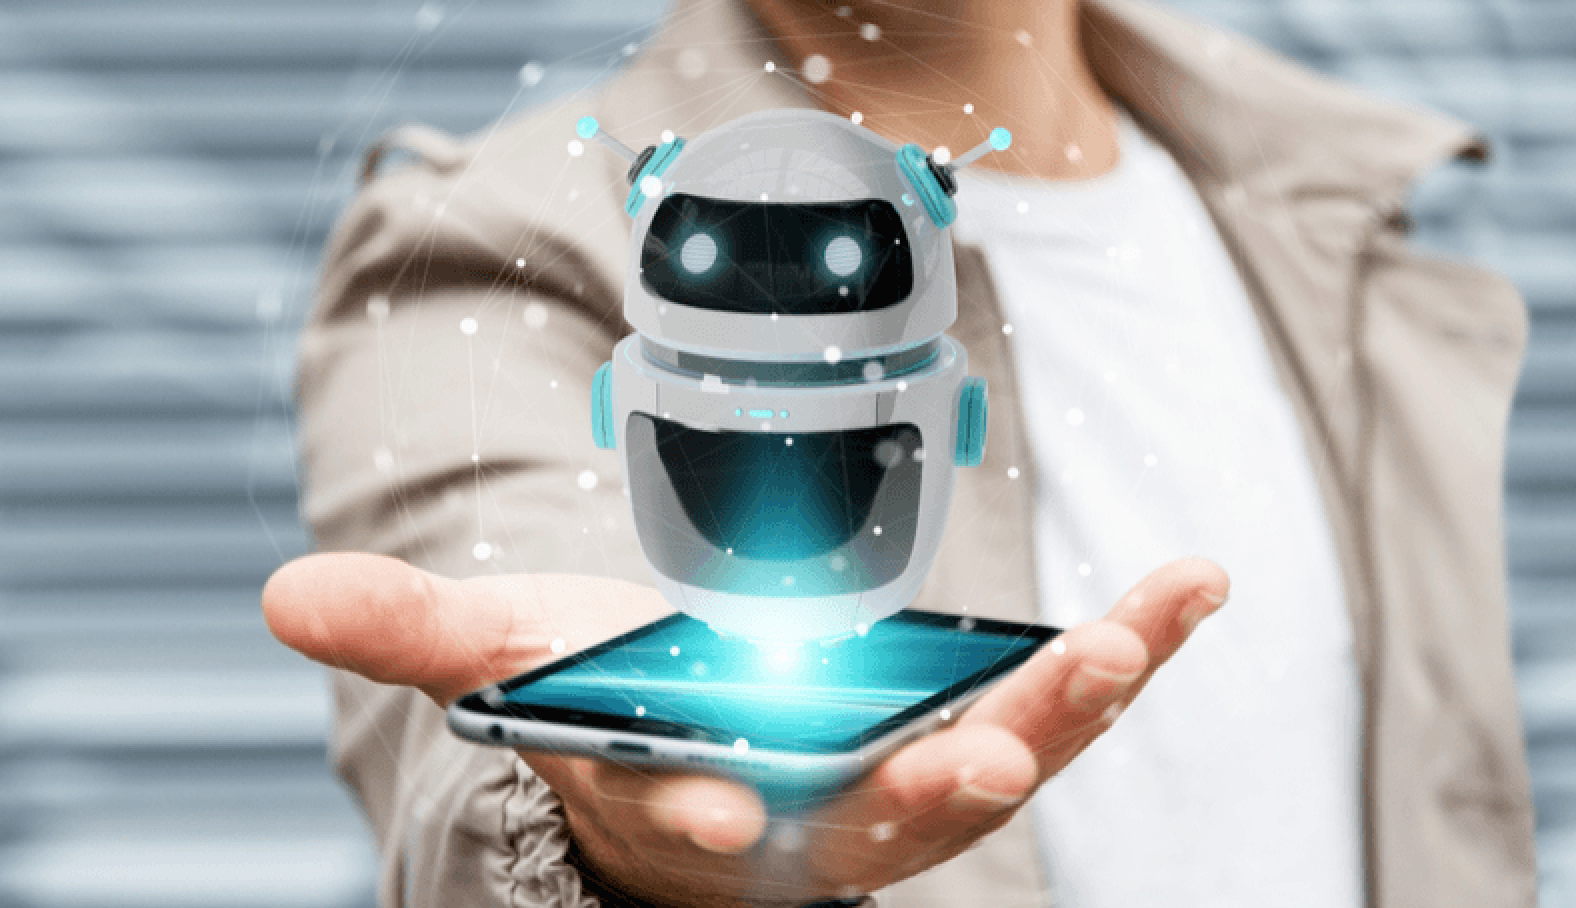 The Growing importance of Chatbots in our Lives